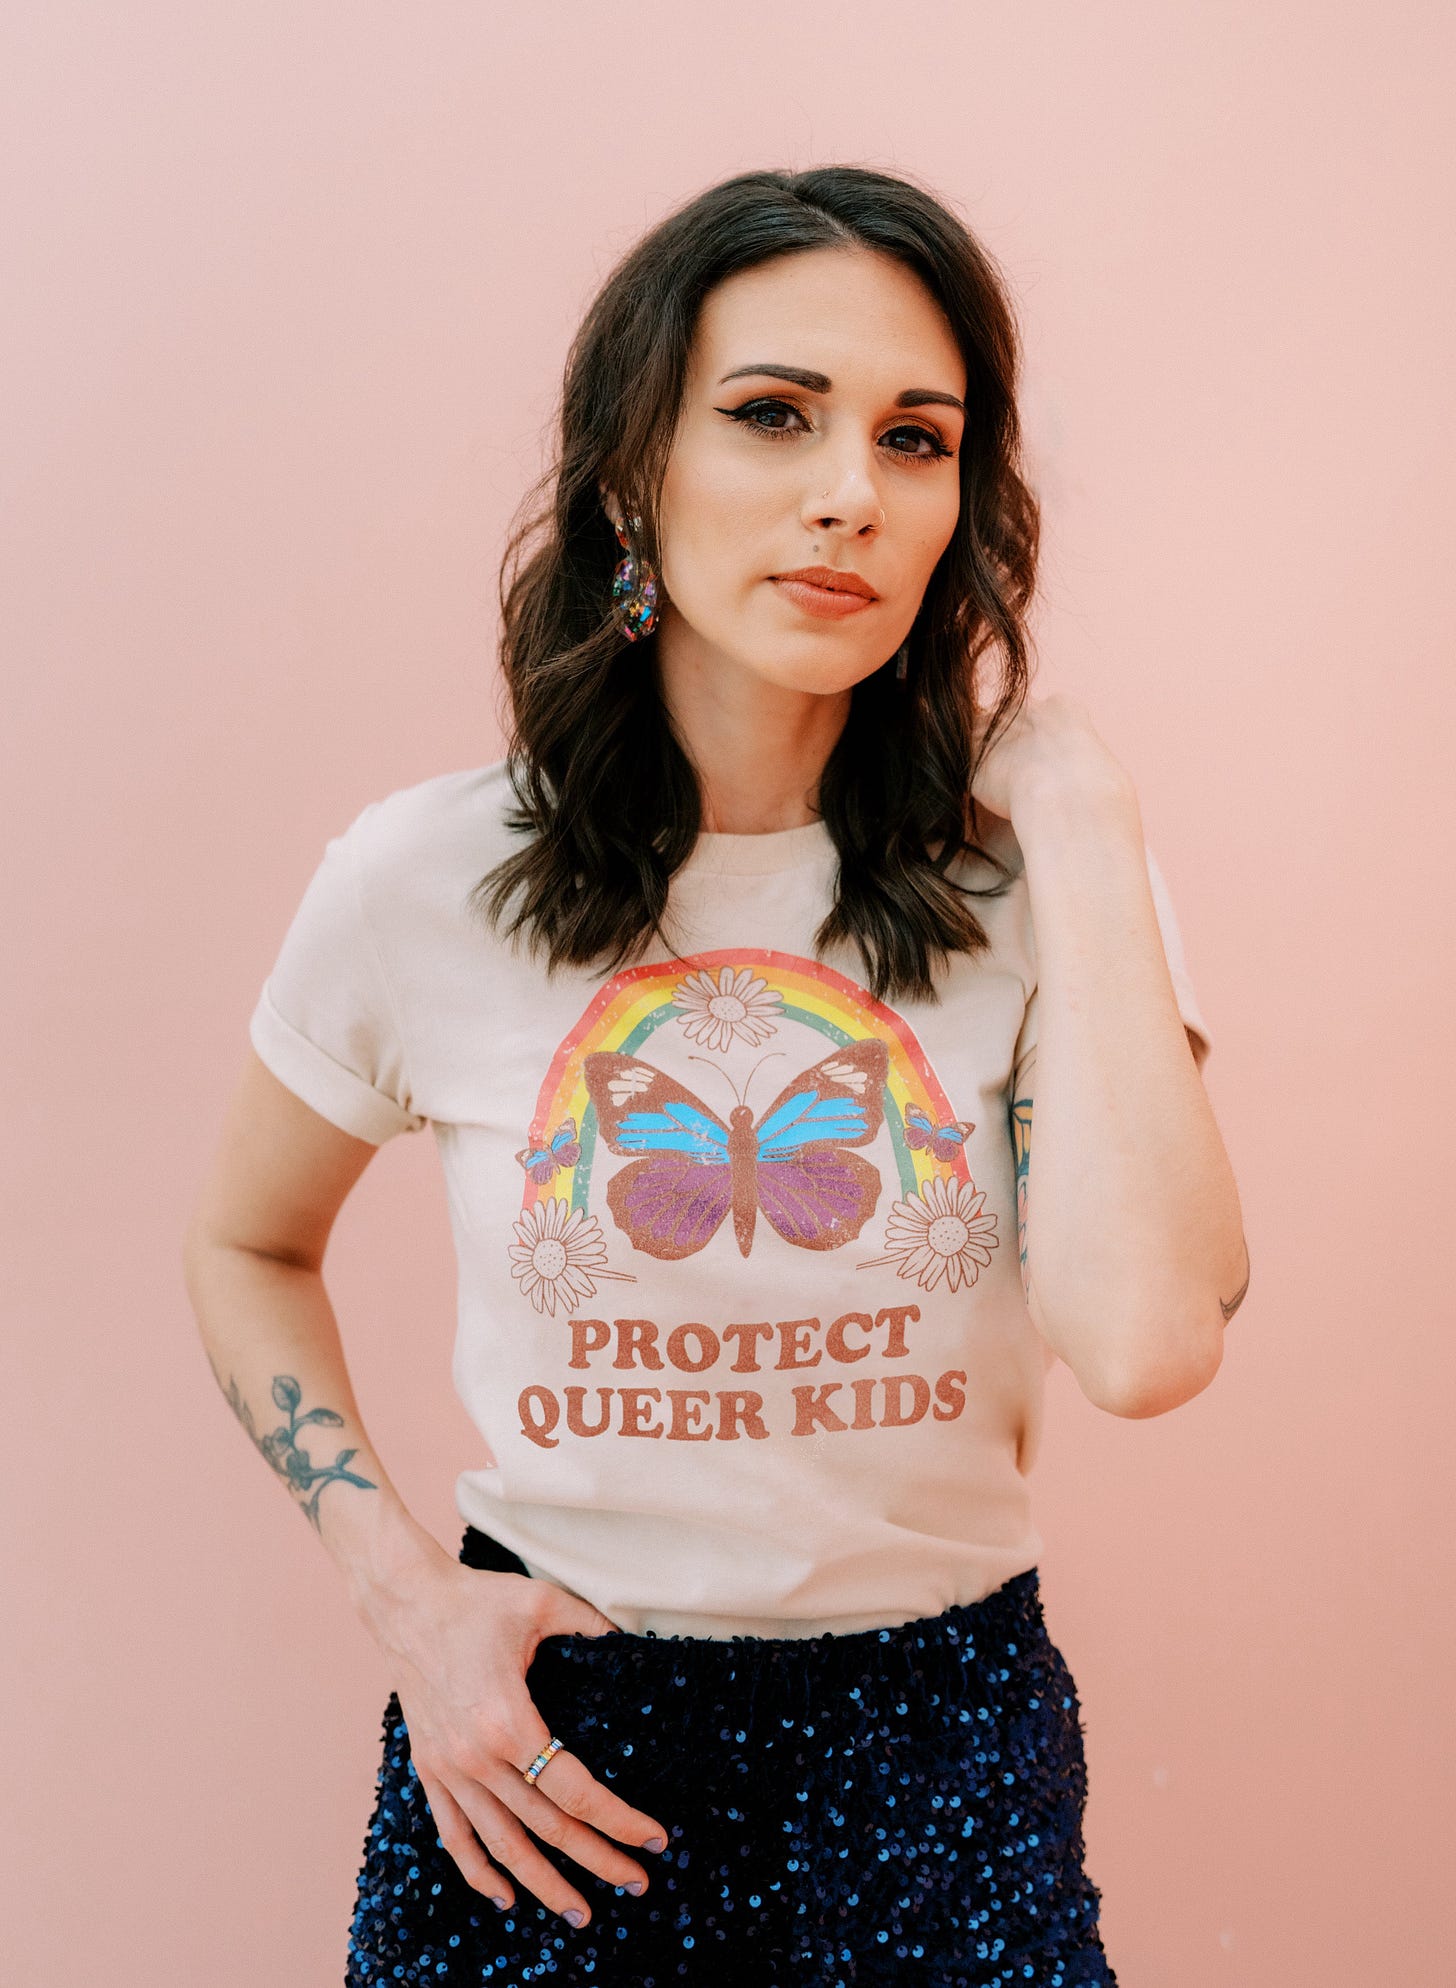 A photo of Shohreh from the waste up wearing navy blue sequined pants and a tucked in tshirt with a rainbow over a butterfly that reads, "Protect Queer Kids"